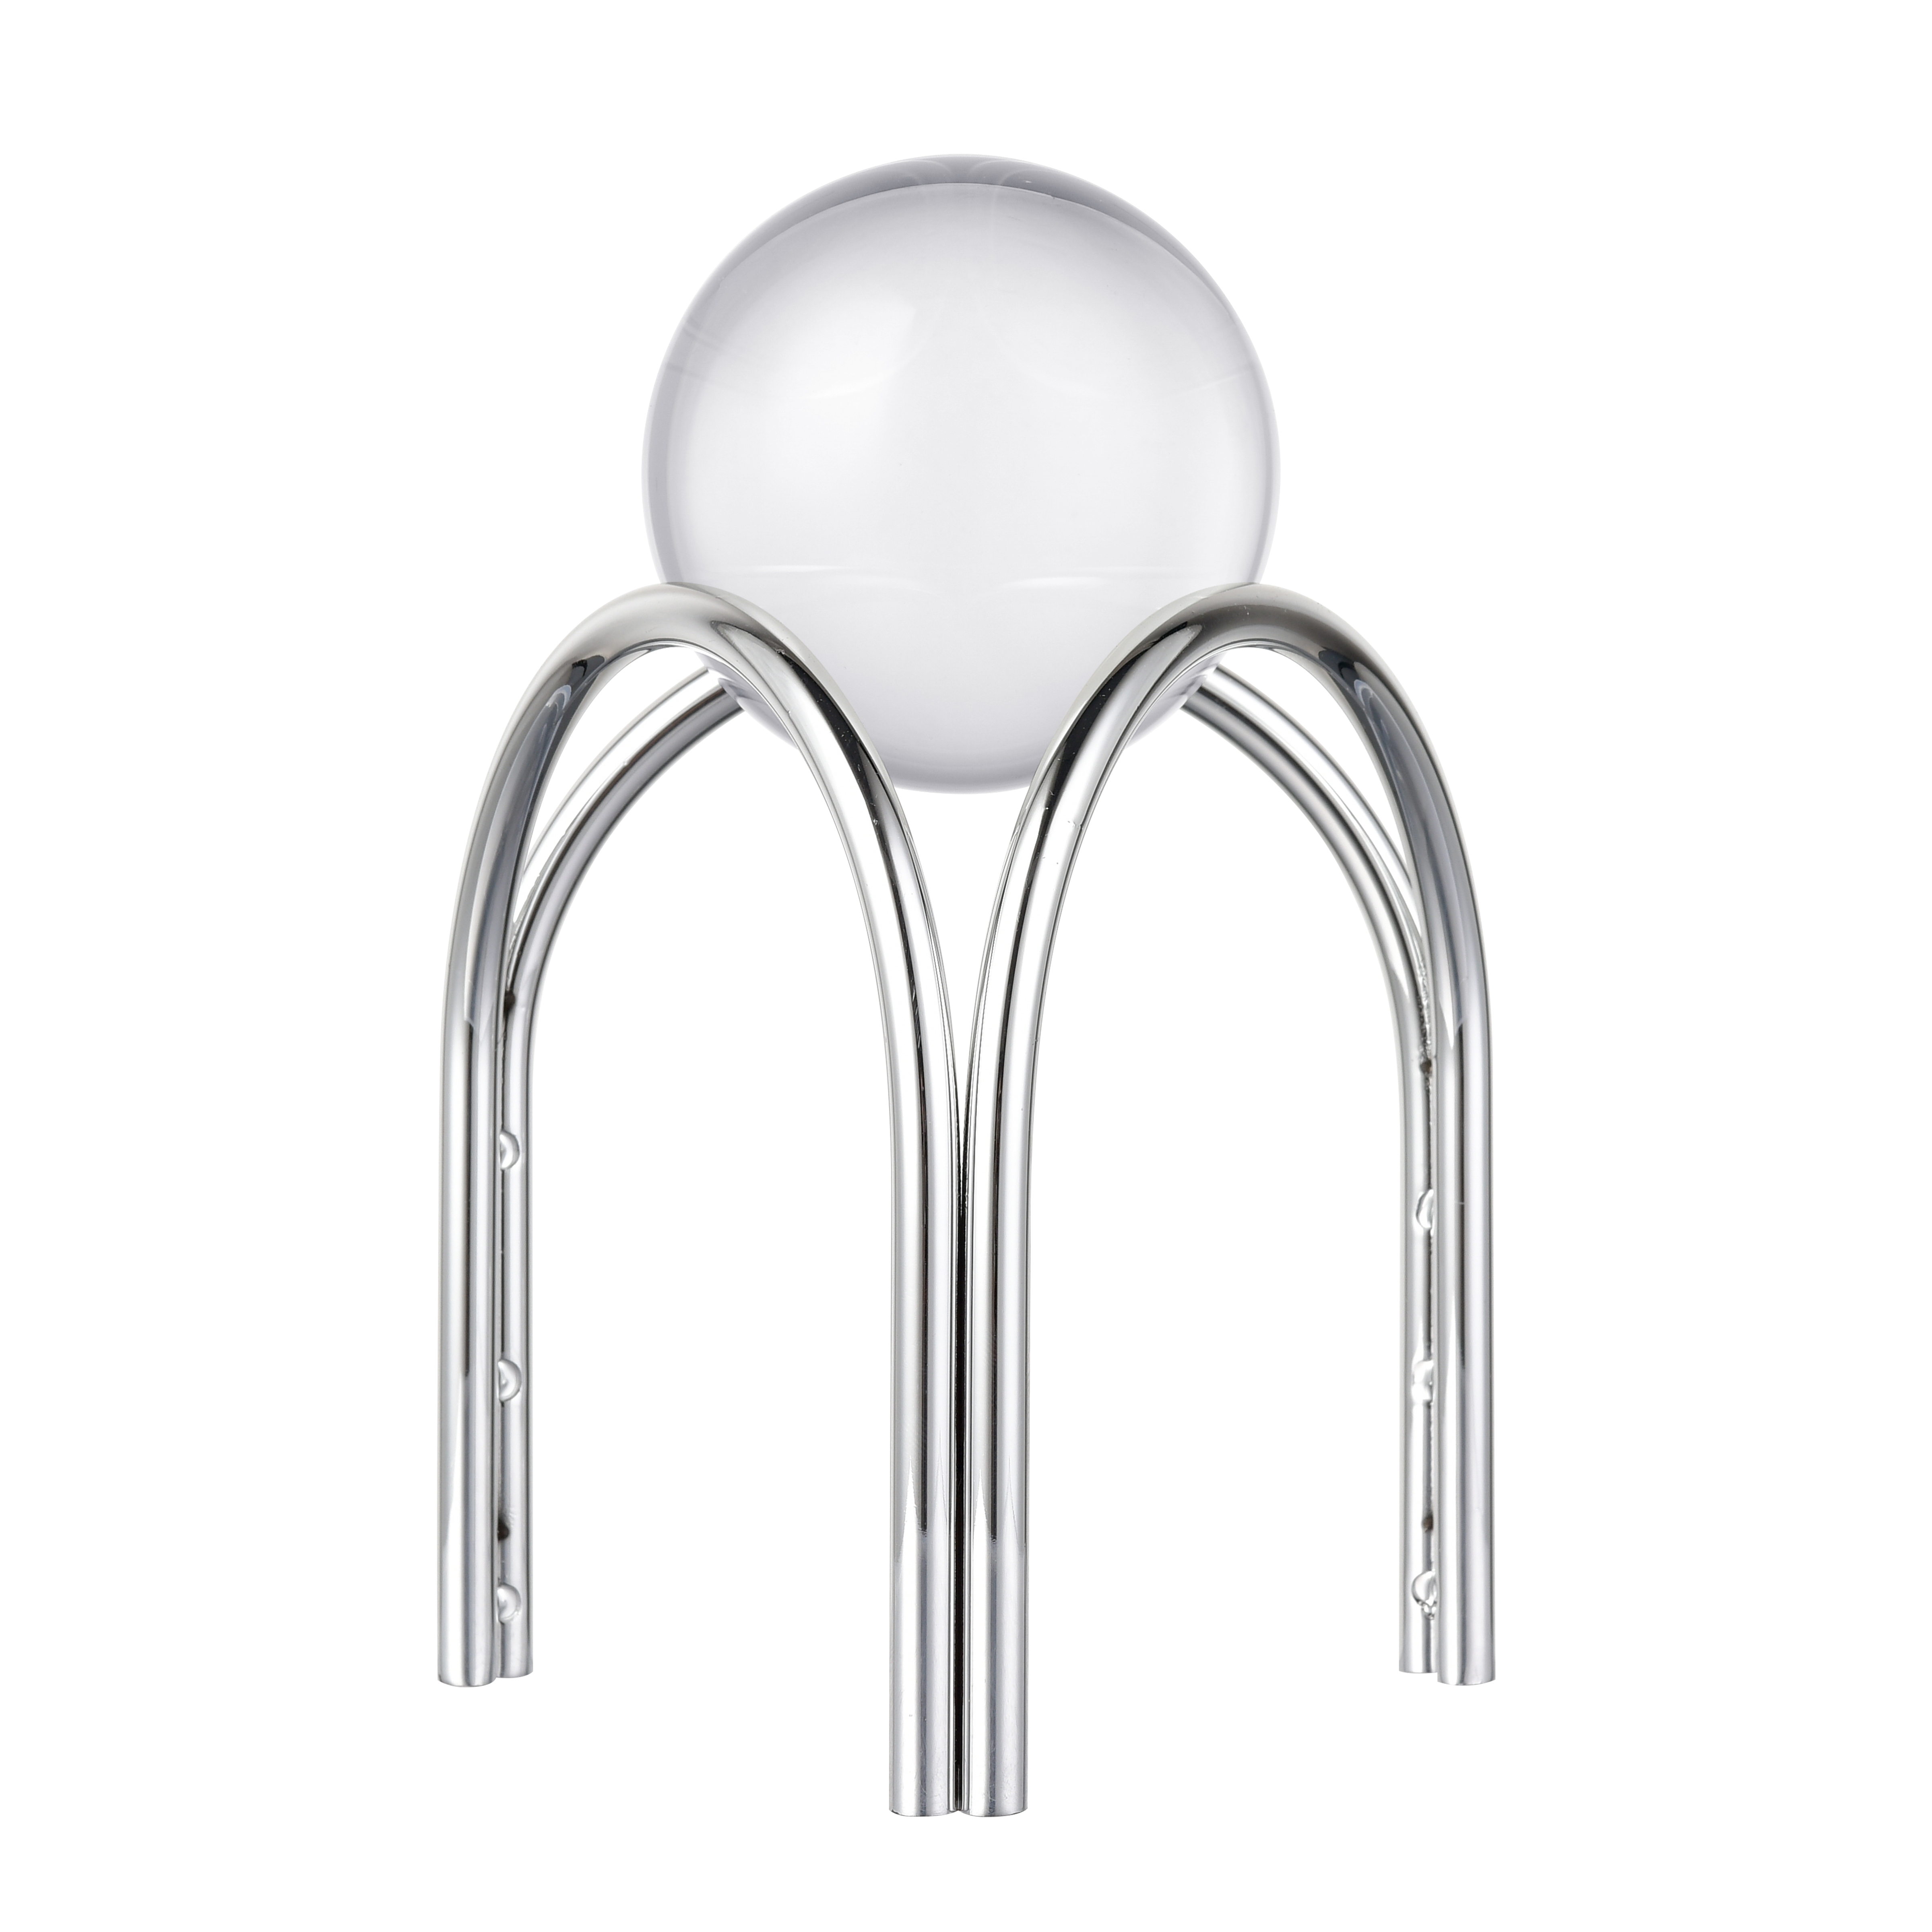 Sibyl Orb Stand - Set of 2 Silver - Image 1